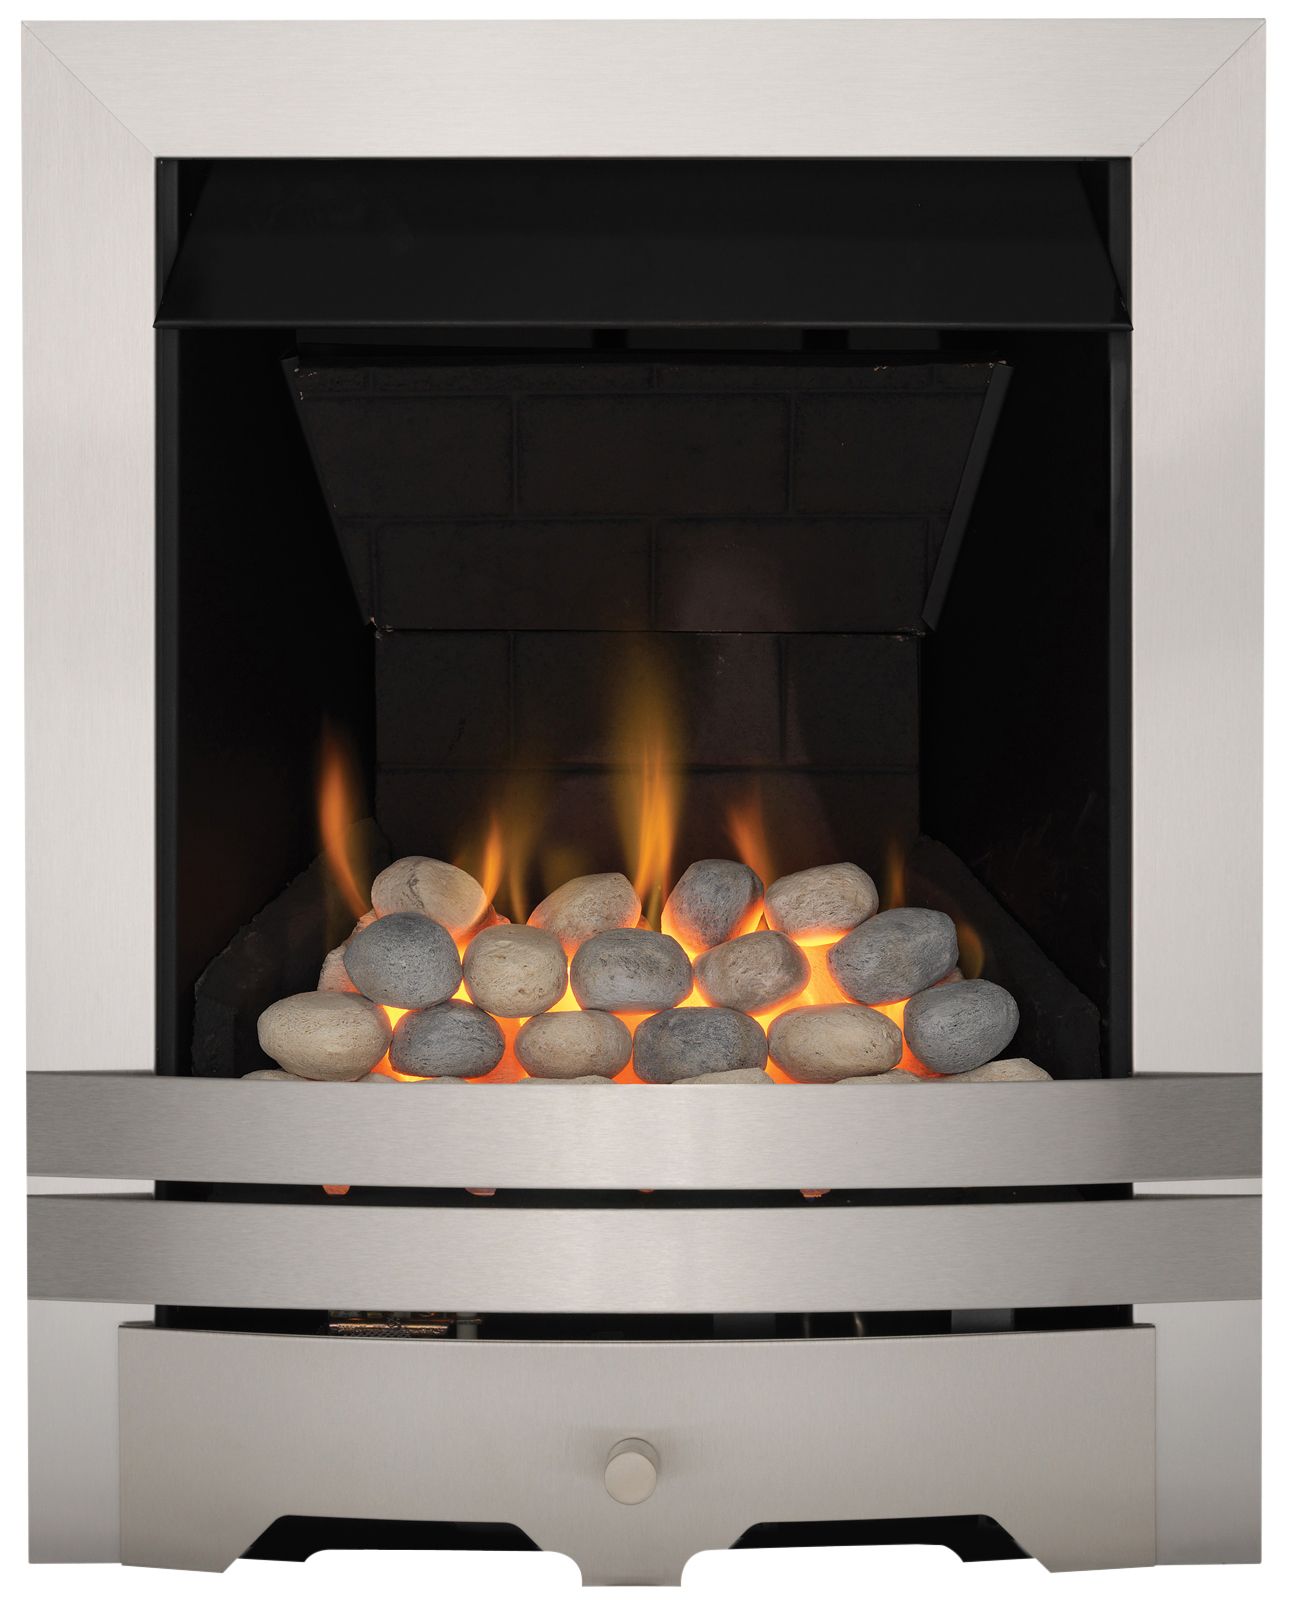 Focal Point Lulworth multi flue Brushed stainless steel effect Remote controlled Gas Fire